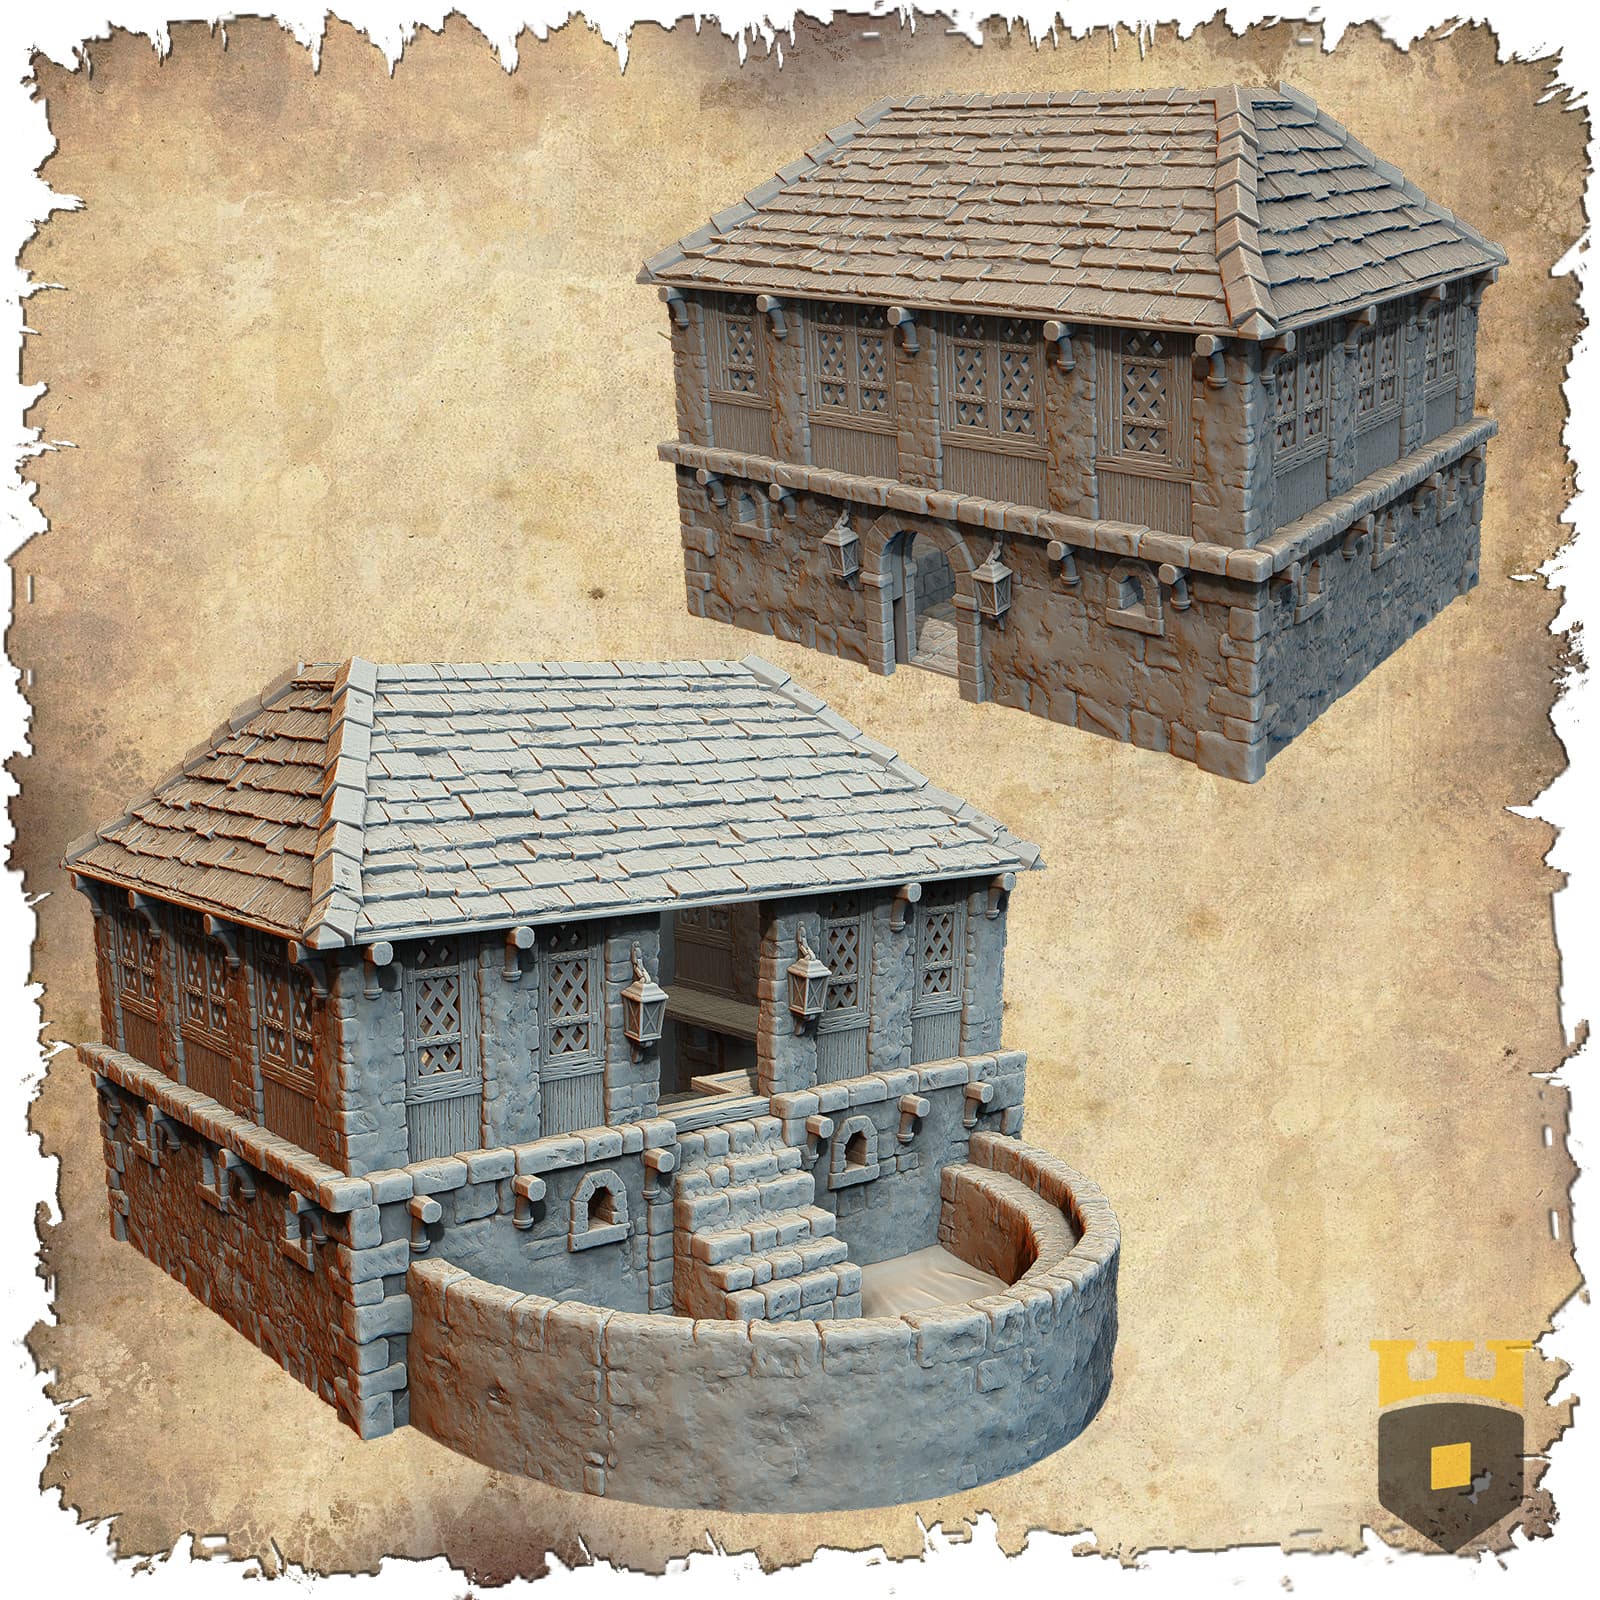 D&D Pathfinder, 3D Printed Tabletop Miniatures and Props Leichheim 32mm Bath House DnD Dungeons and Dragons